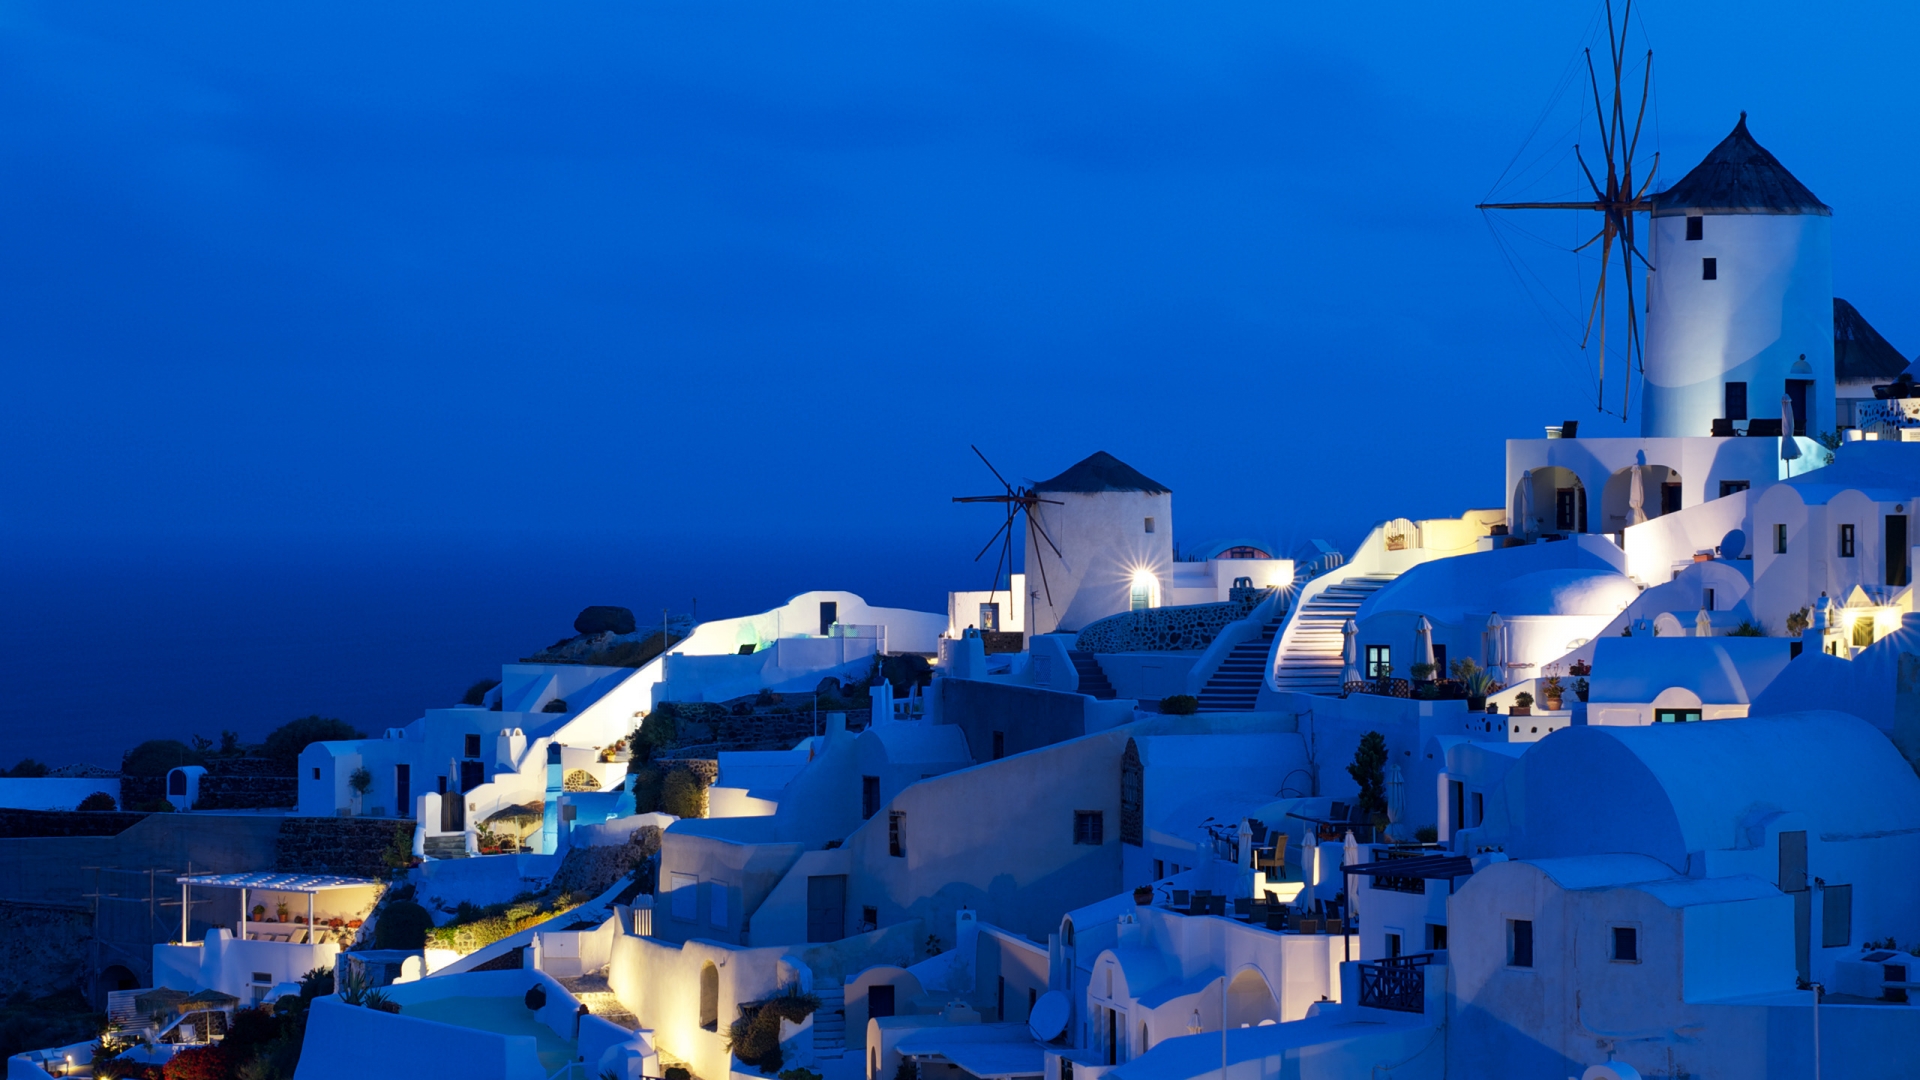 Oia Windmills for 1920 x 1080 HDTV 1080p resolution